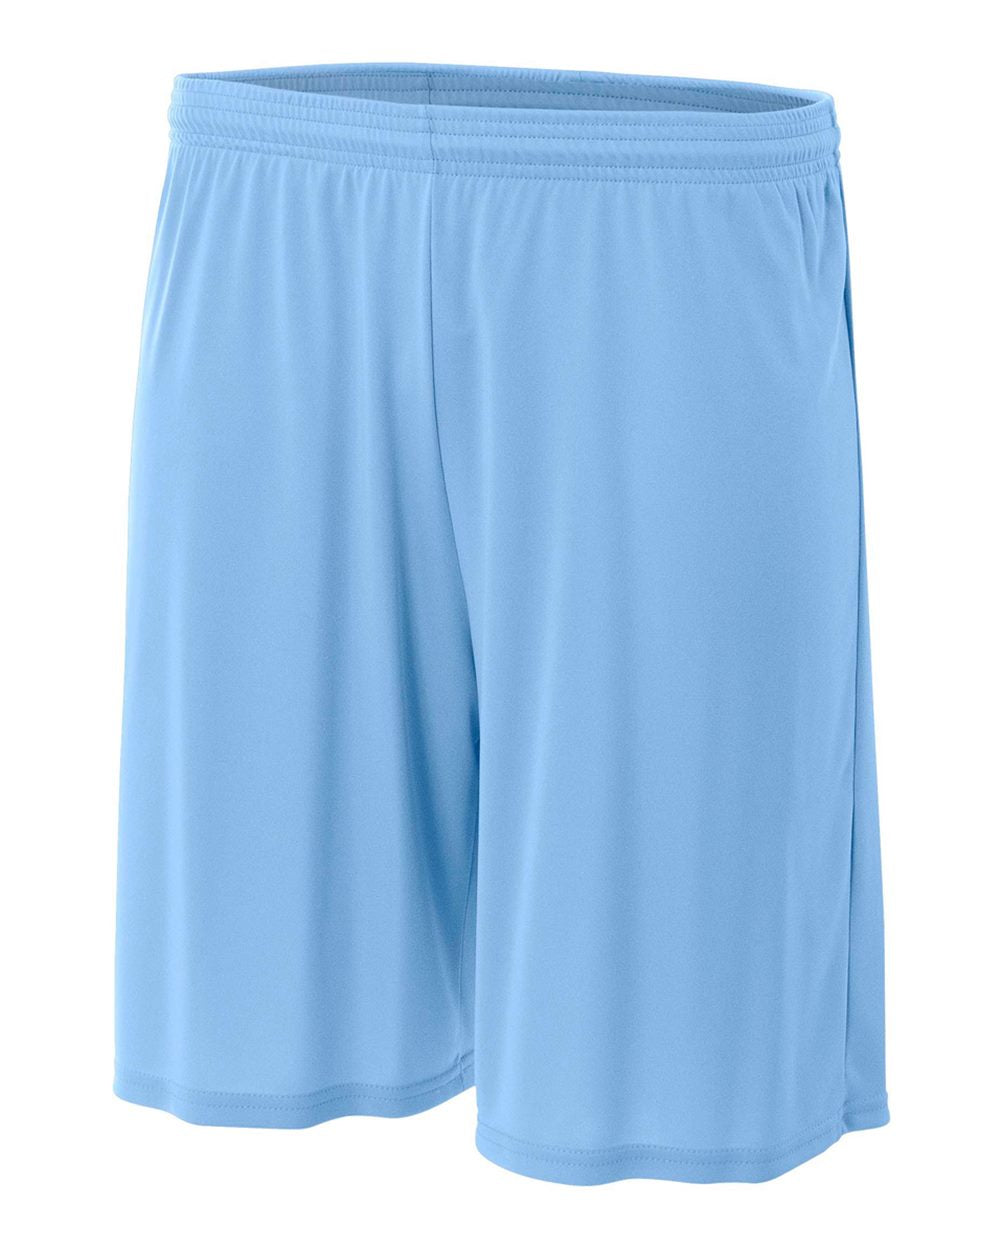 Sample Cooling 7" Performance Shorts